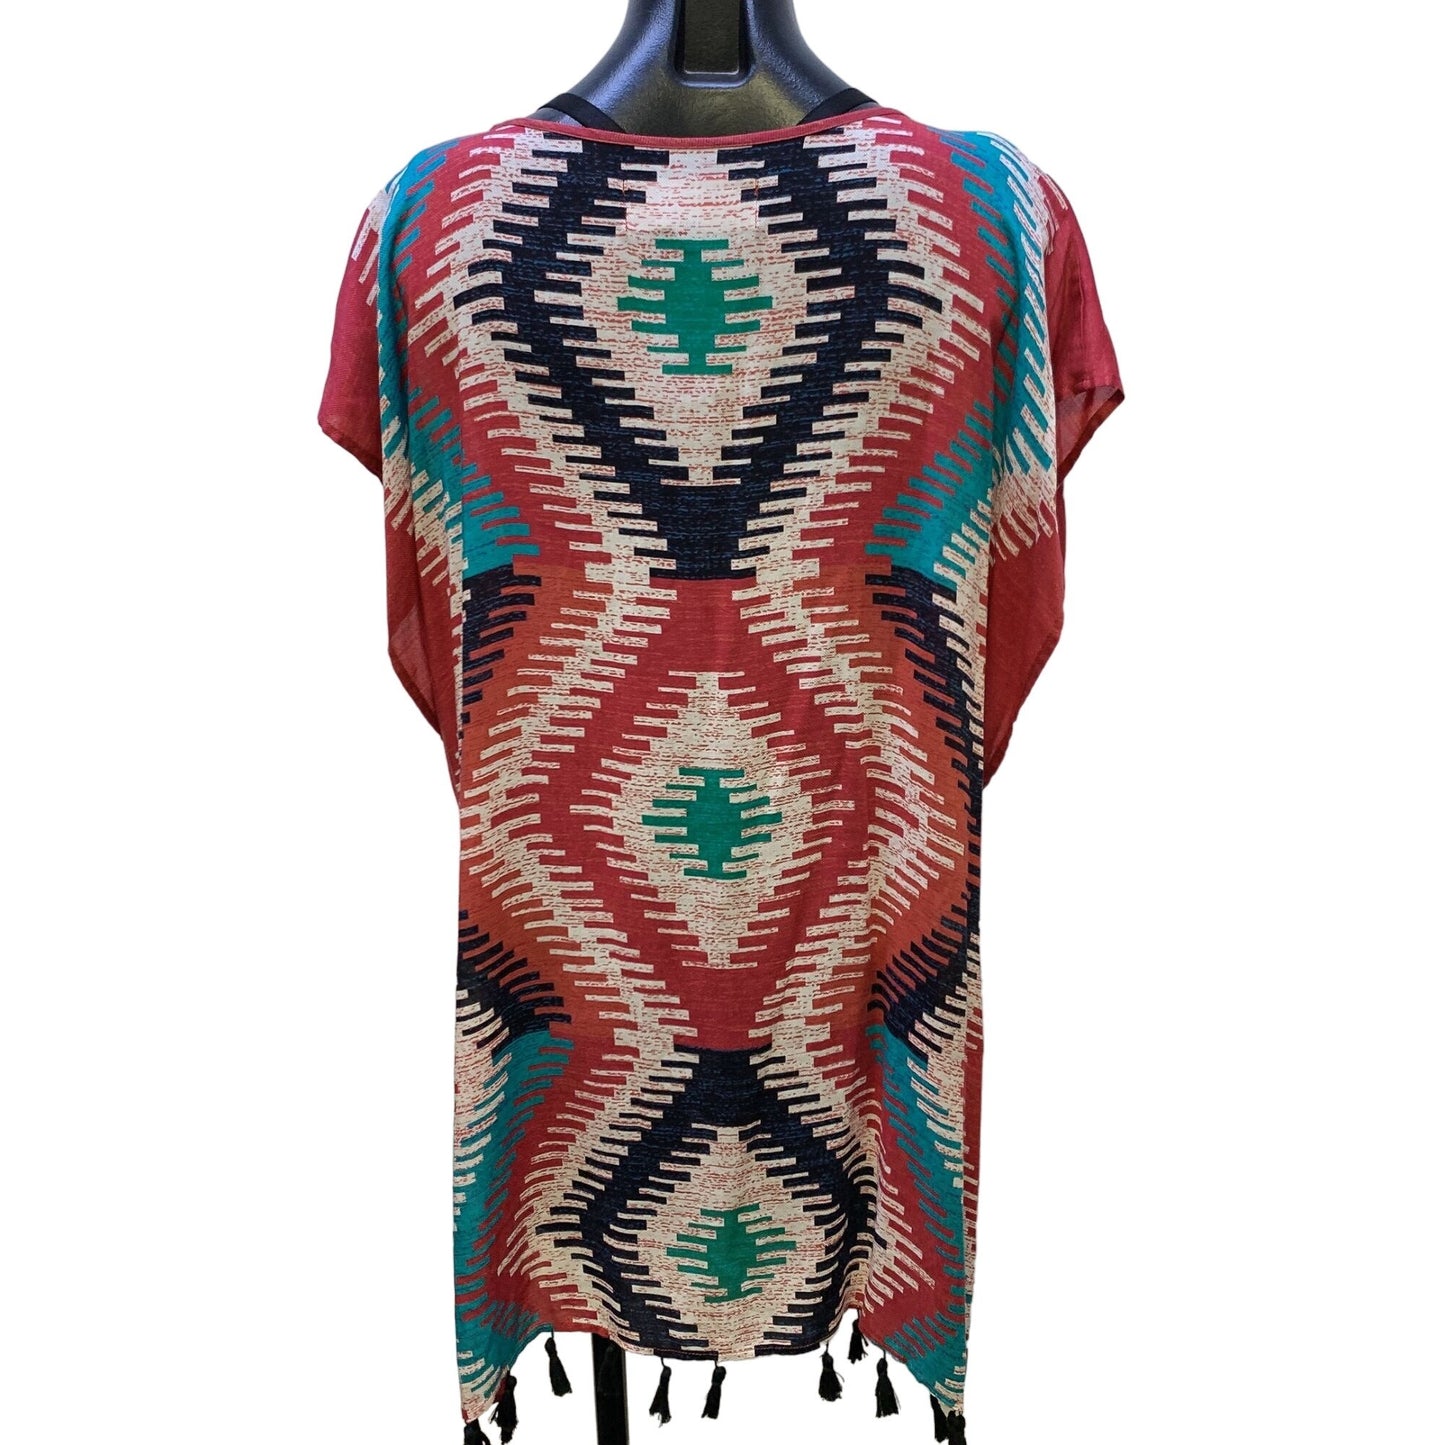 *Double D Ranch Multi-colored Southwestern Print Fringed Poncho Size S/M